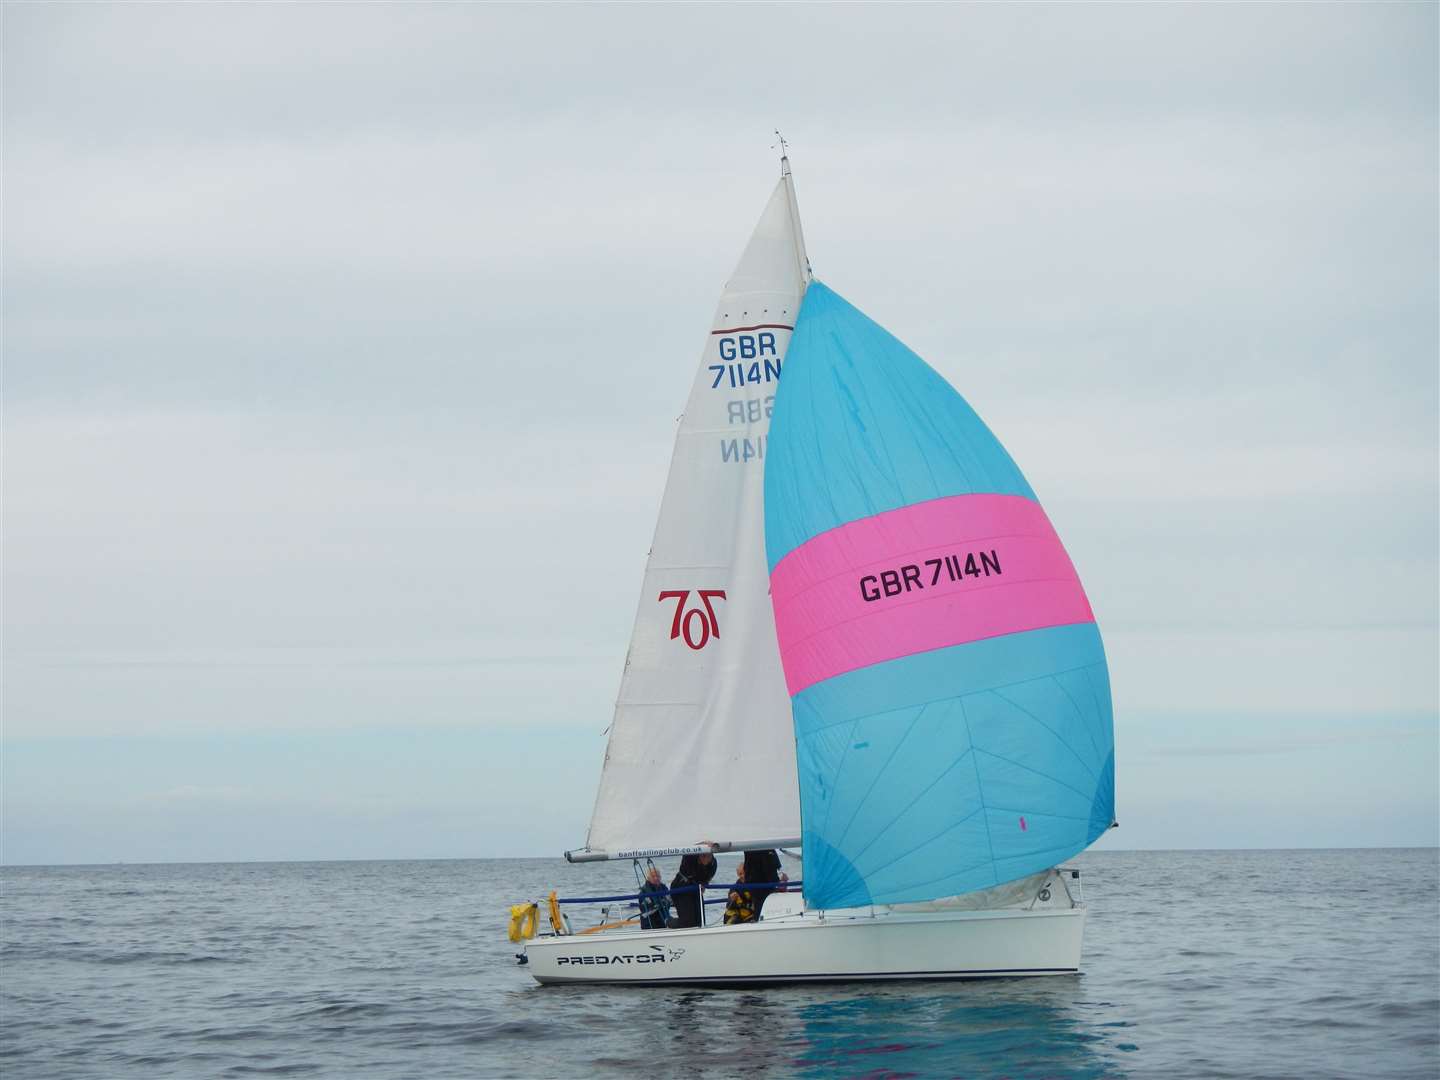 There will be an opportunity to try sailing during the open day.